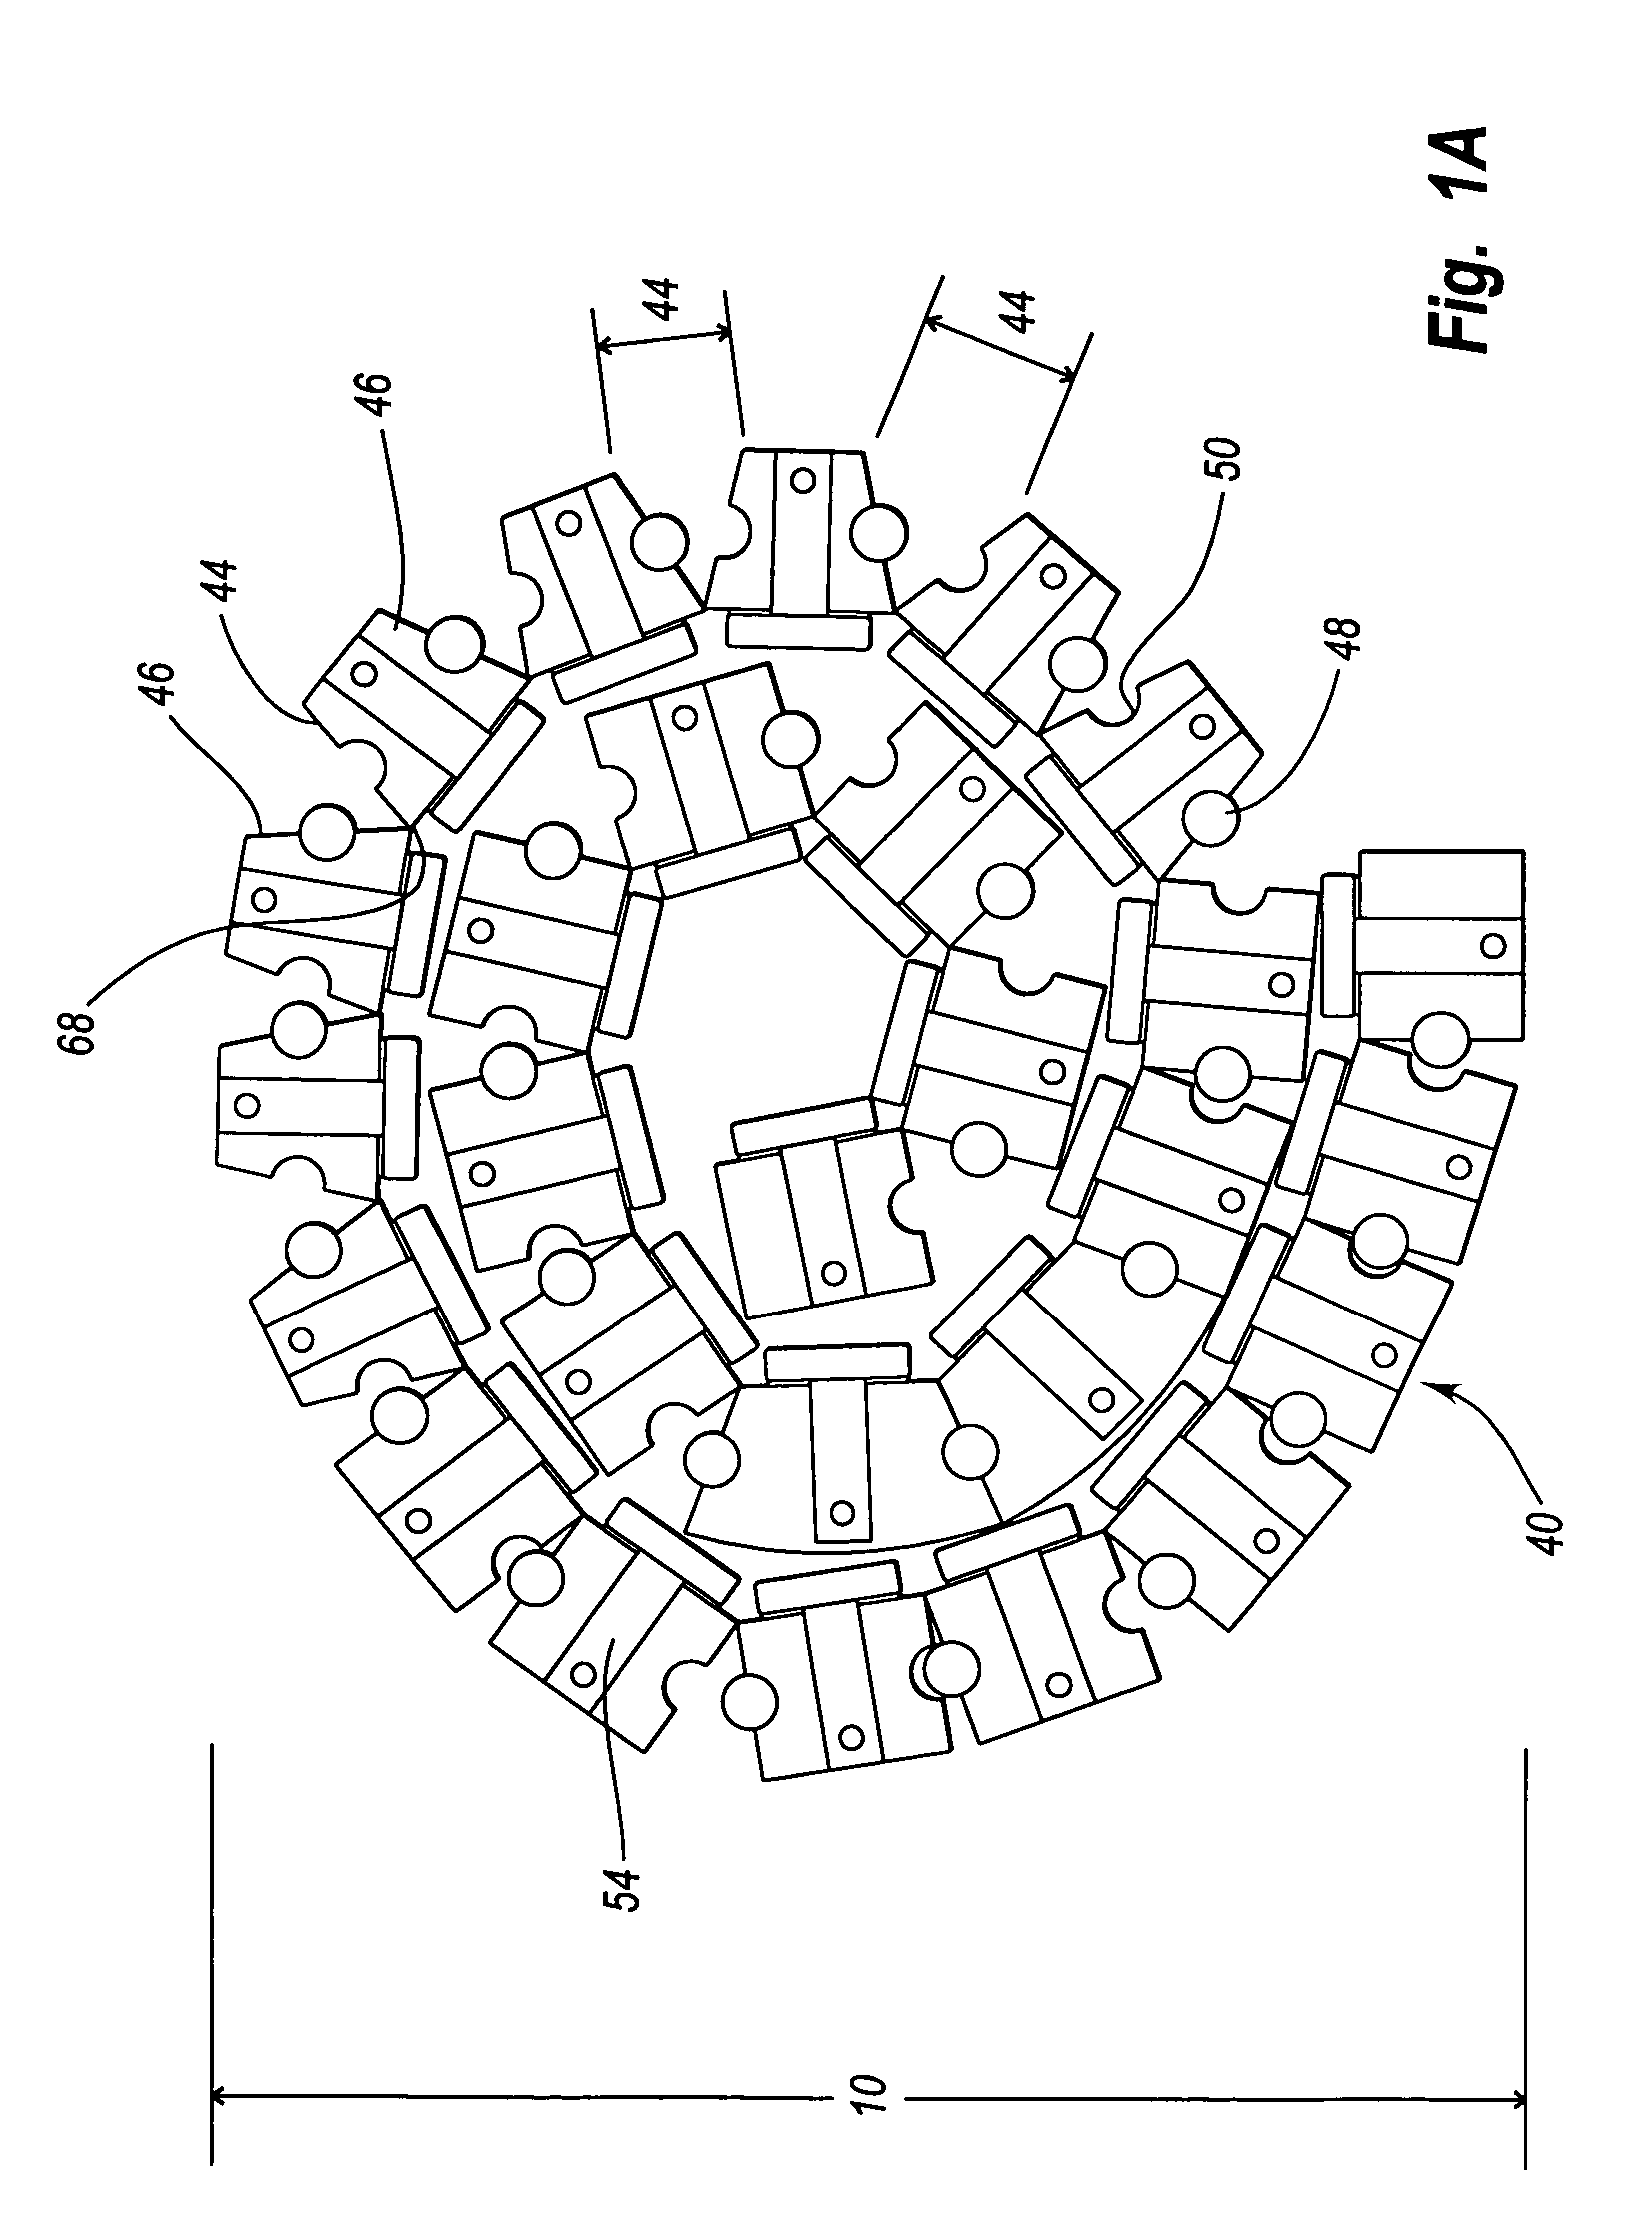 Rollable supporting device